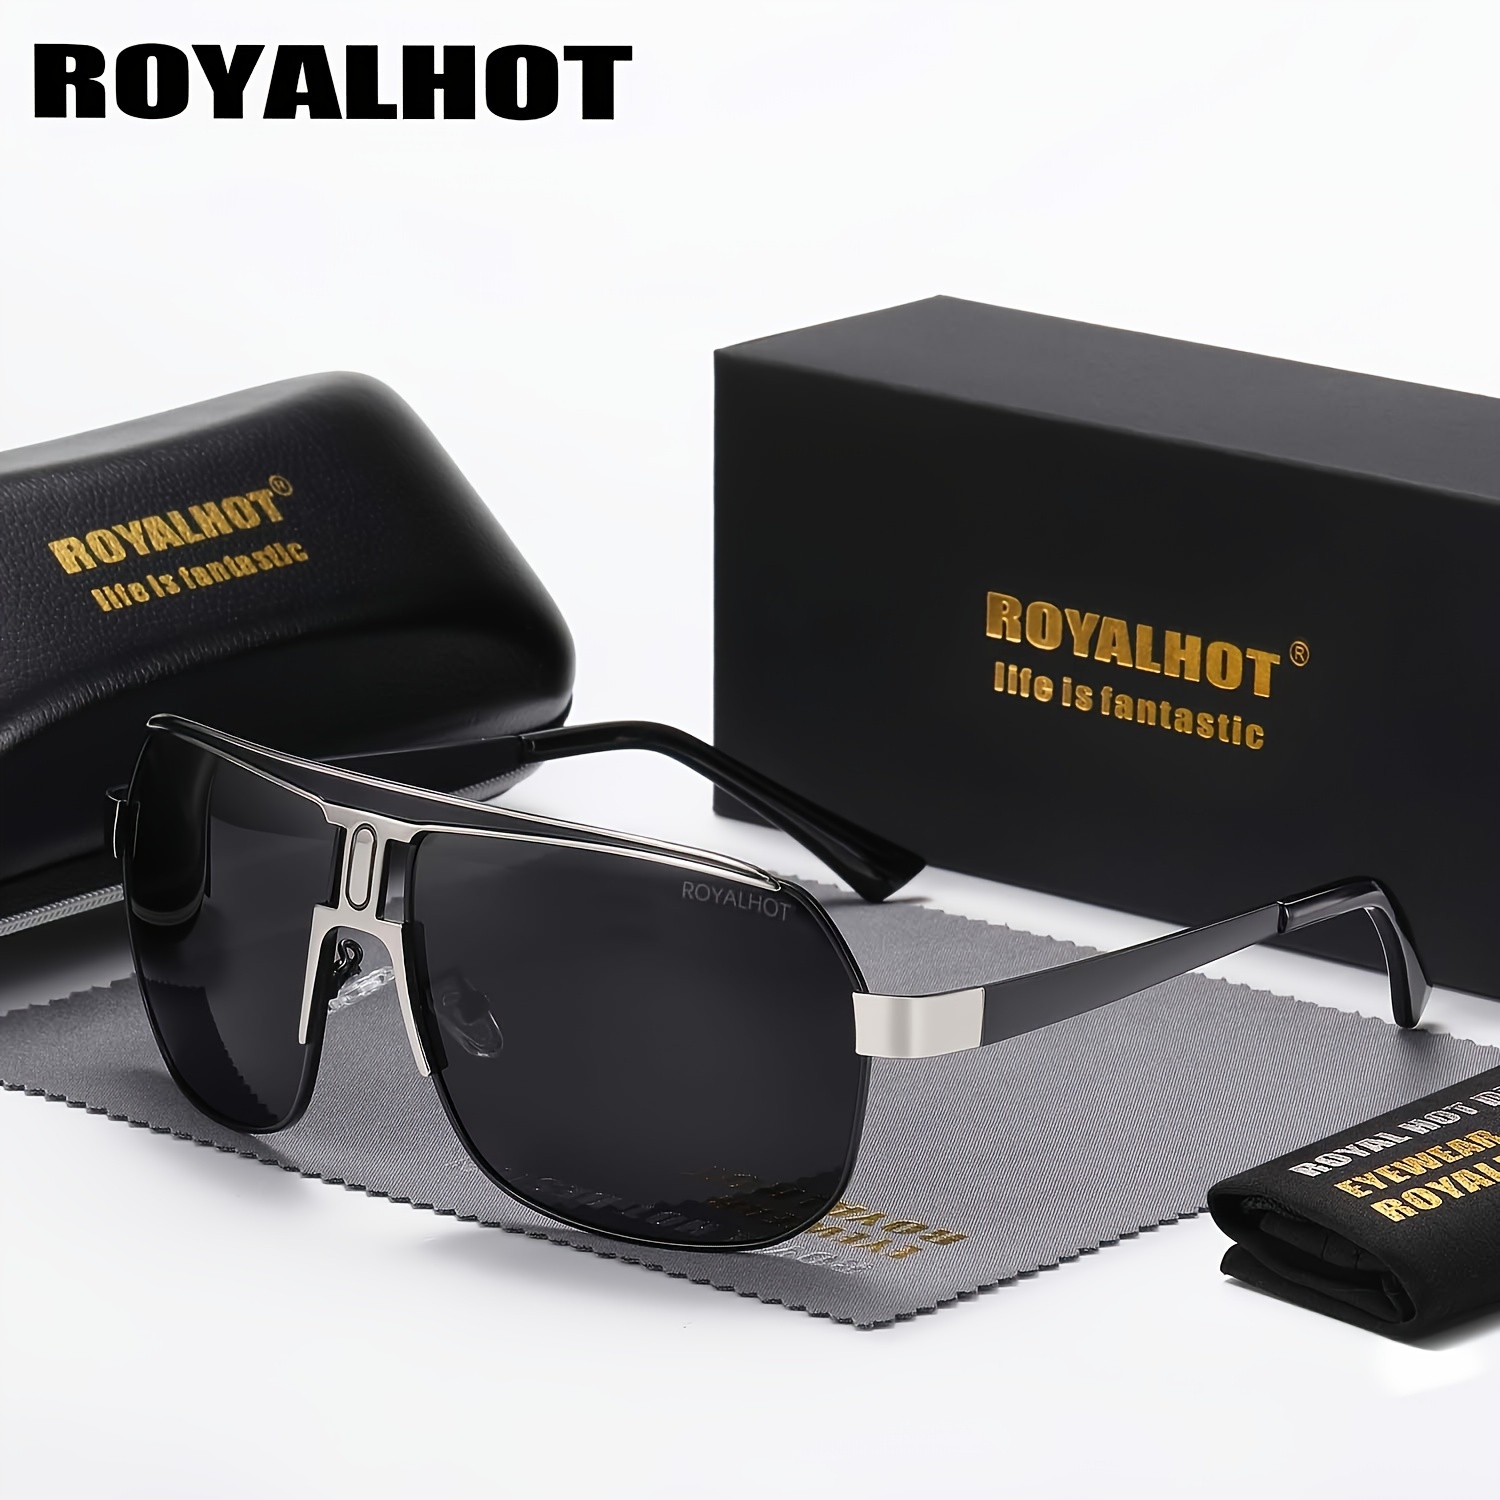 

Royalhot Men Women Polarized Alloy Square Oversized Frame Sunglasses Driving Sun Glasses Shades Oculos Masculino Male 60041, Ideal Choice For Gifts